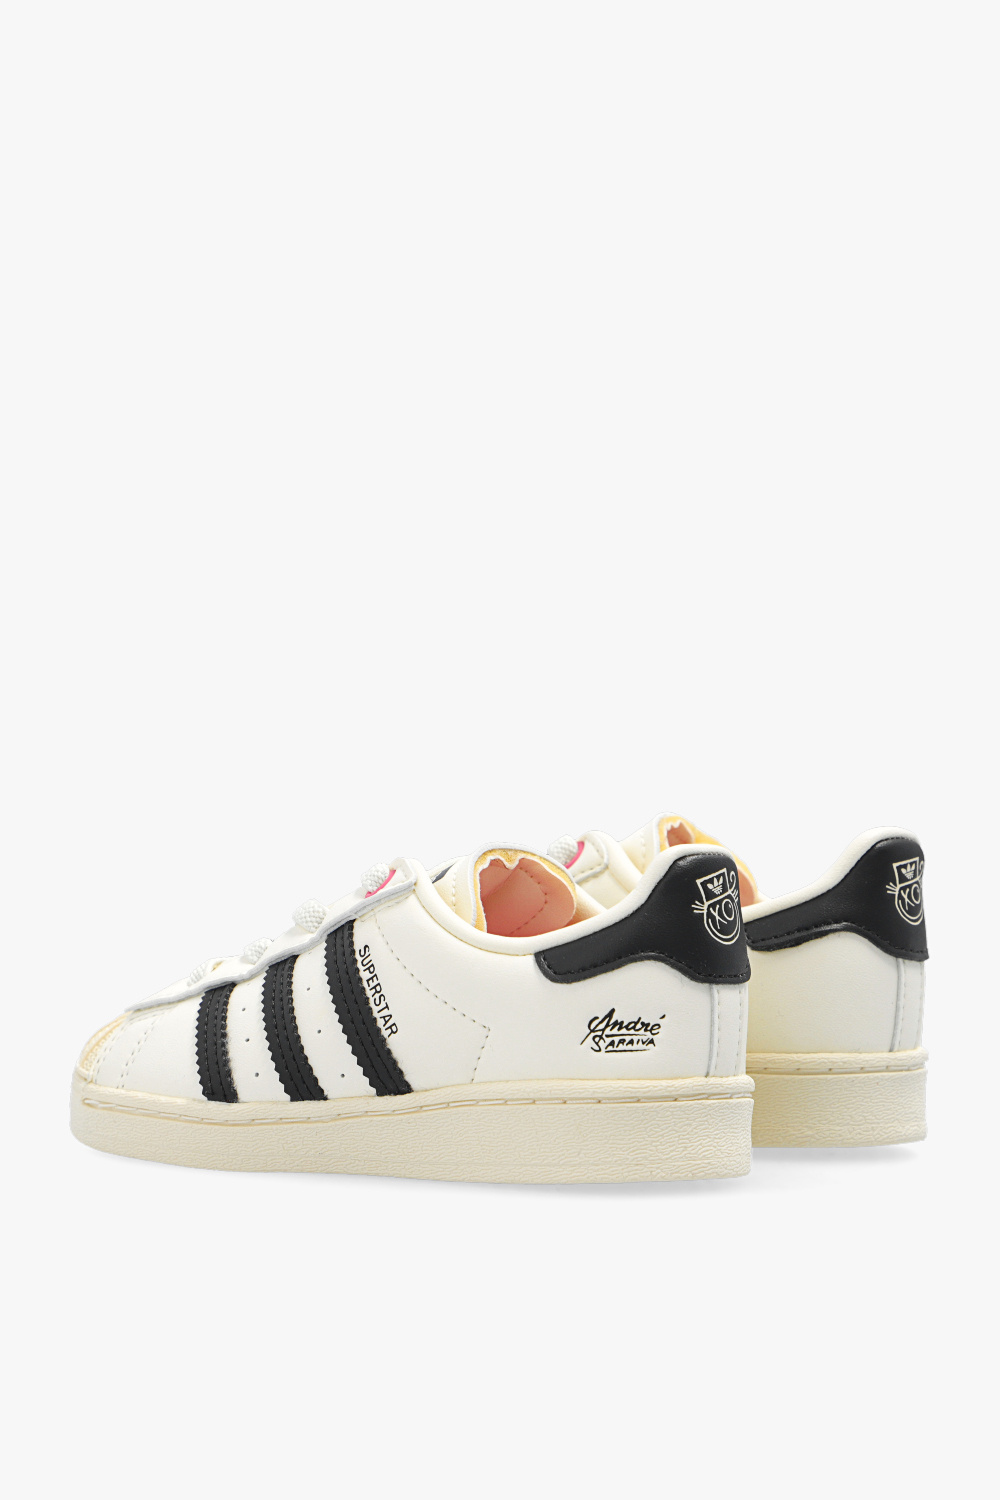 ADIDAS Kids ADIDAS Kids adidas contact in woodmead philippines price